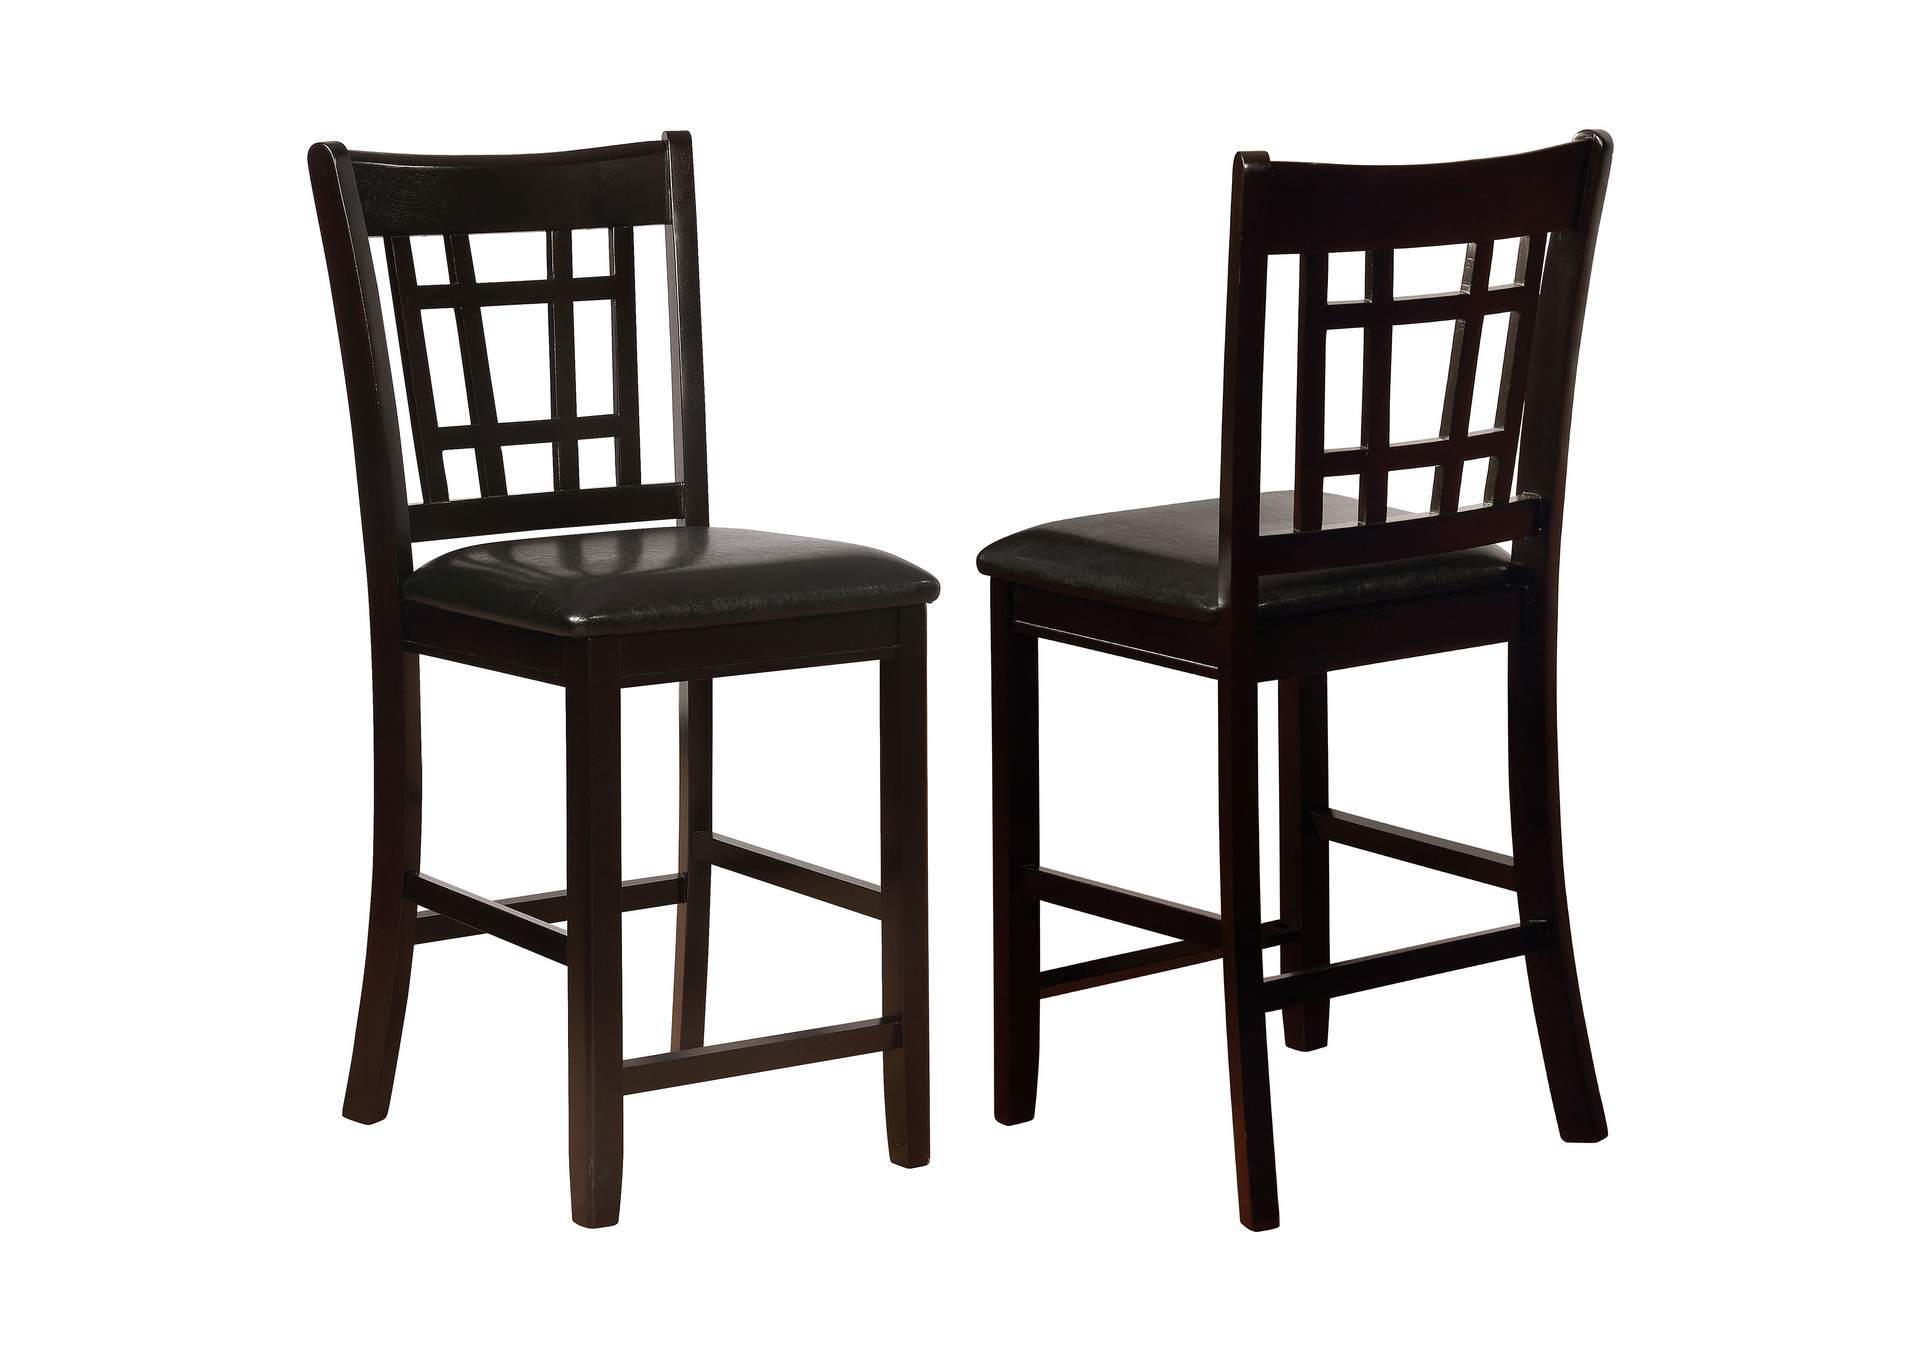 Lavon Upholstered Counter Height Stools Black and Espresso (Set of 2),Coaster Furniture